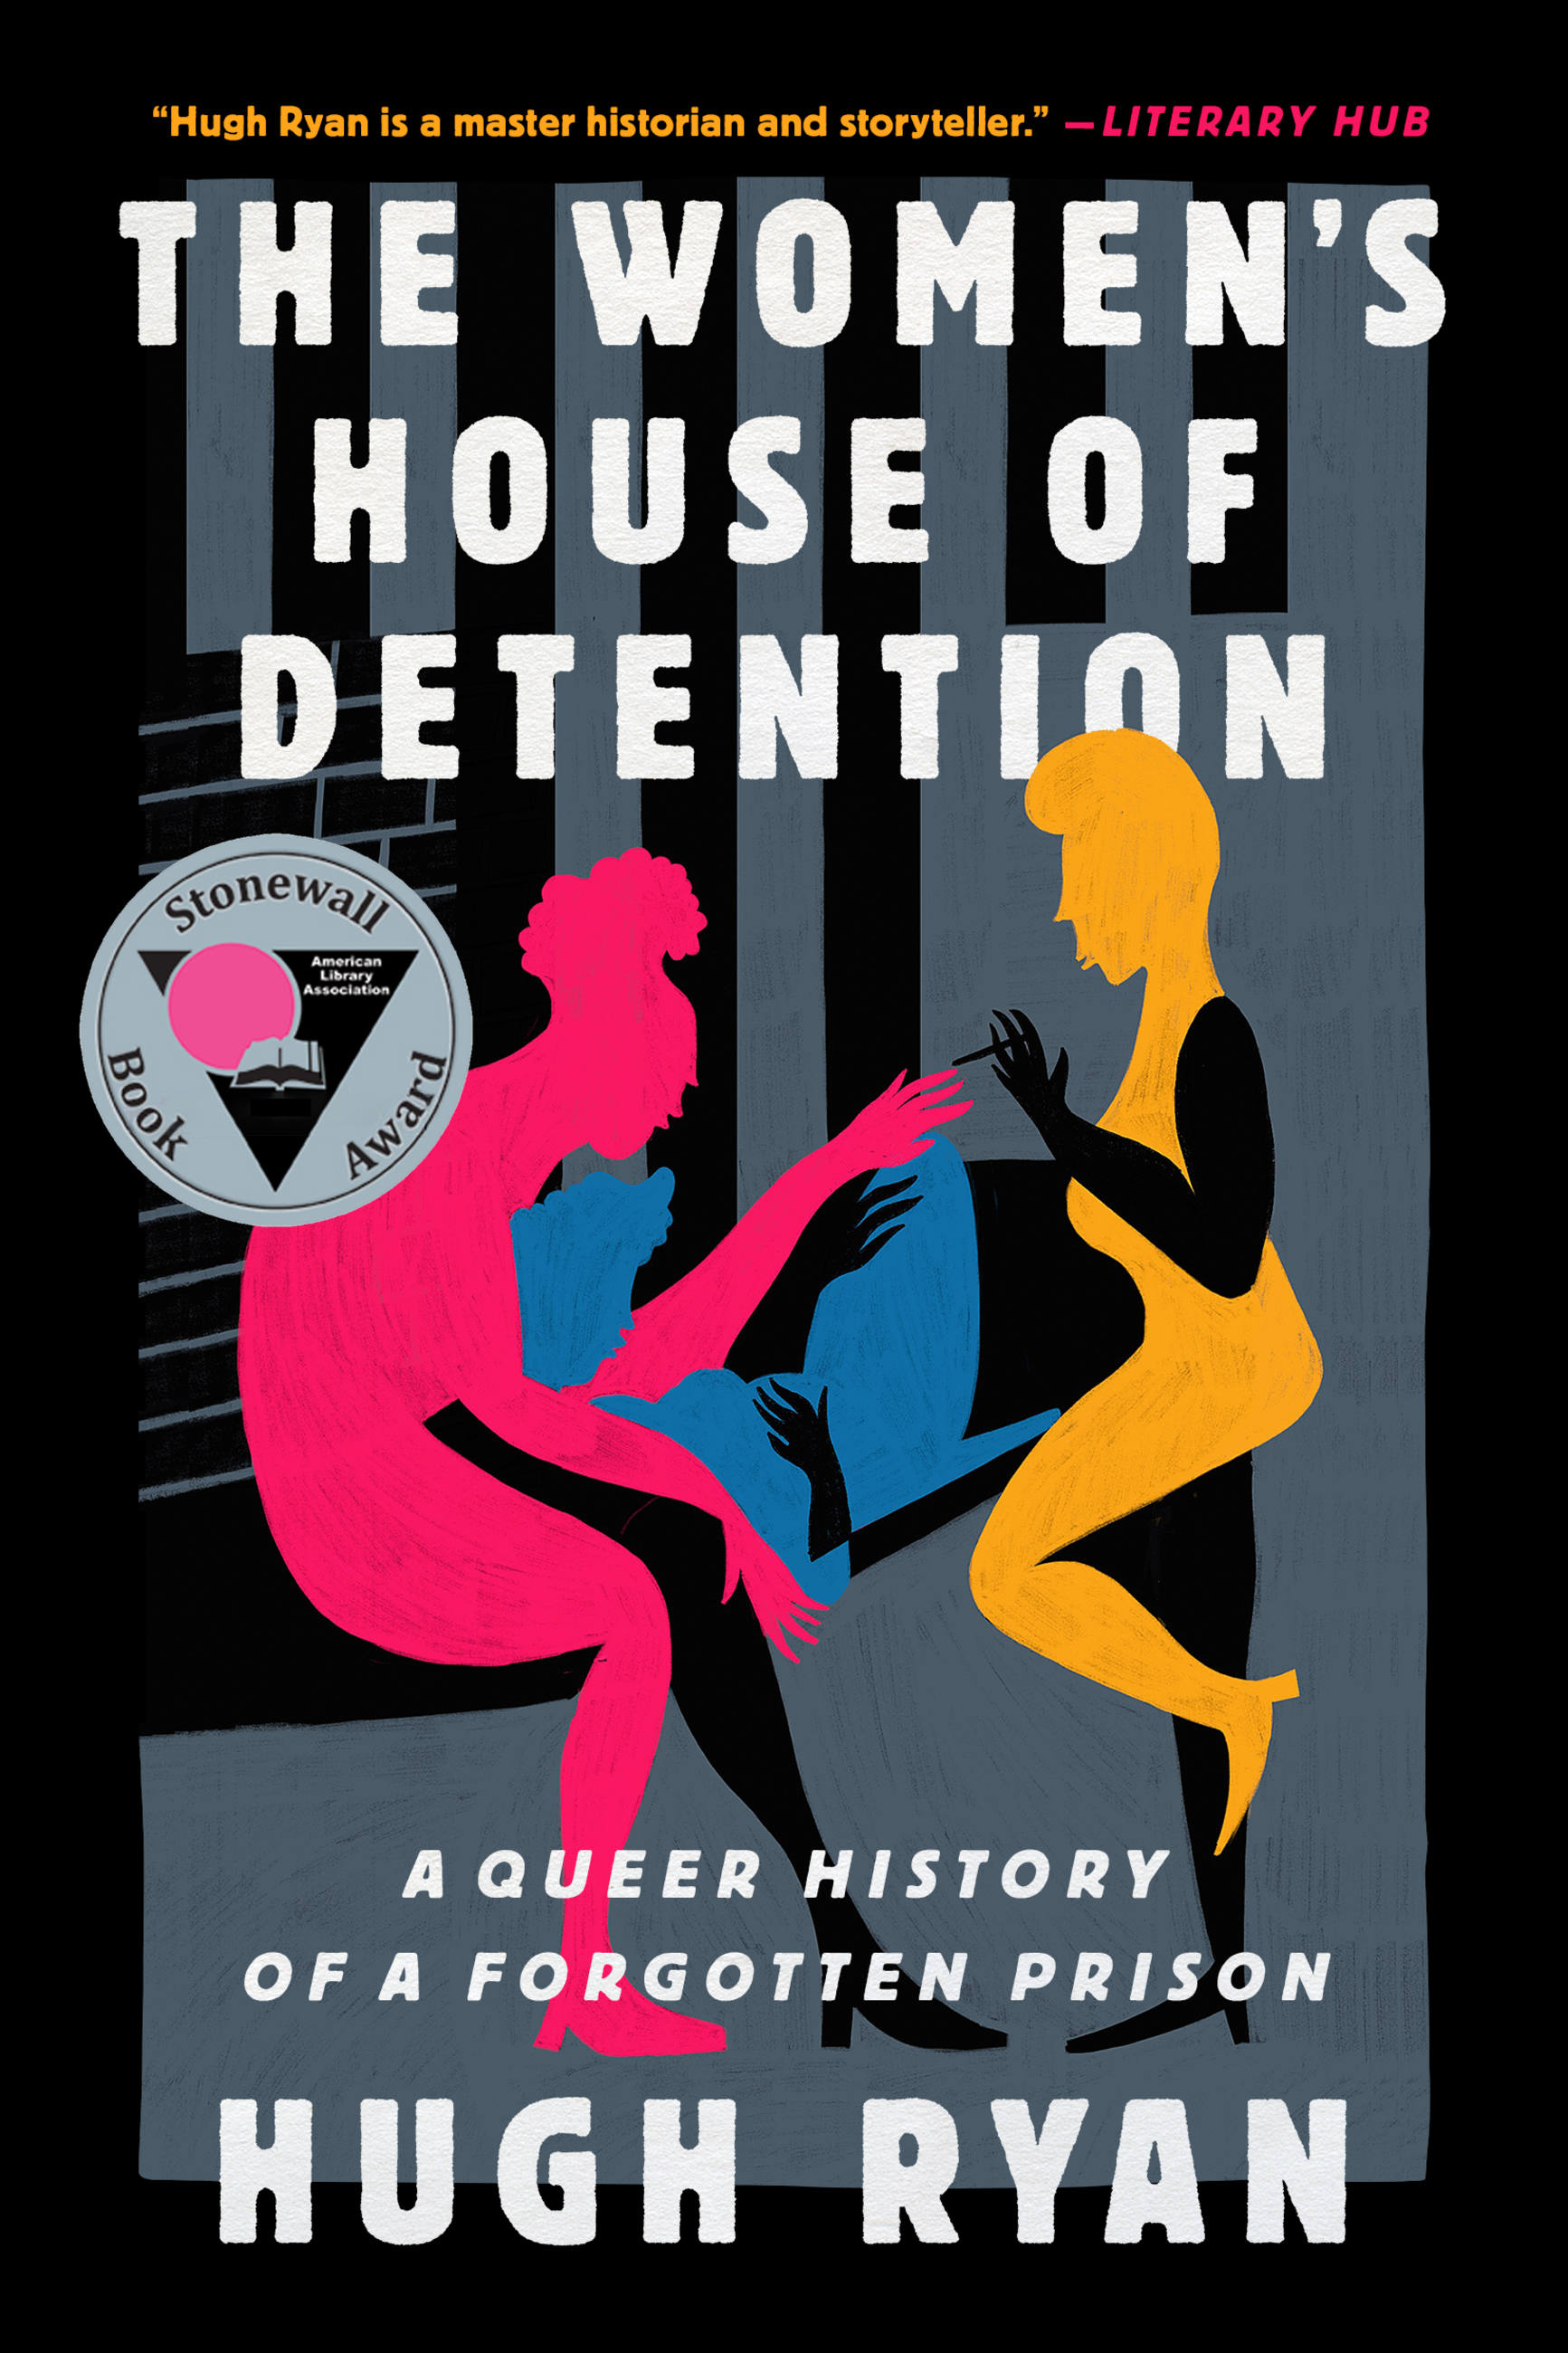 The Women's House of Detention by Hugh Ryan